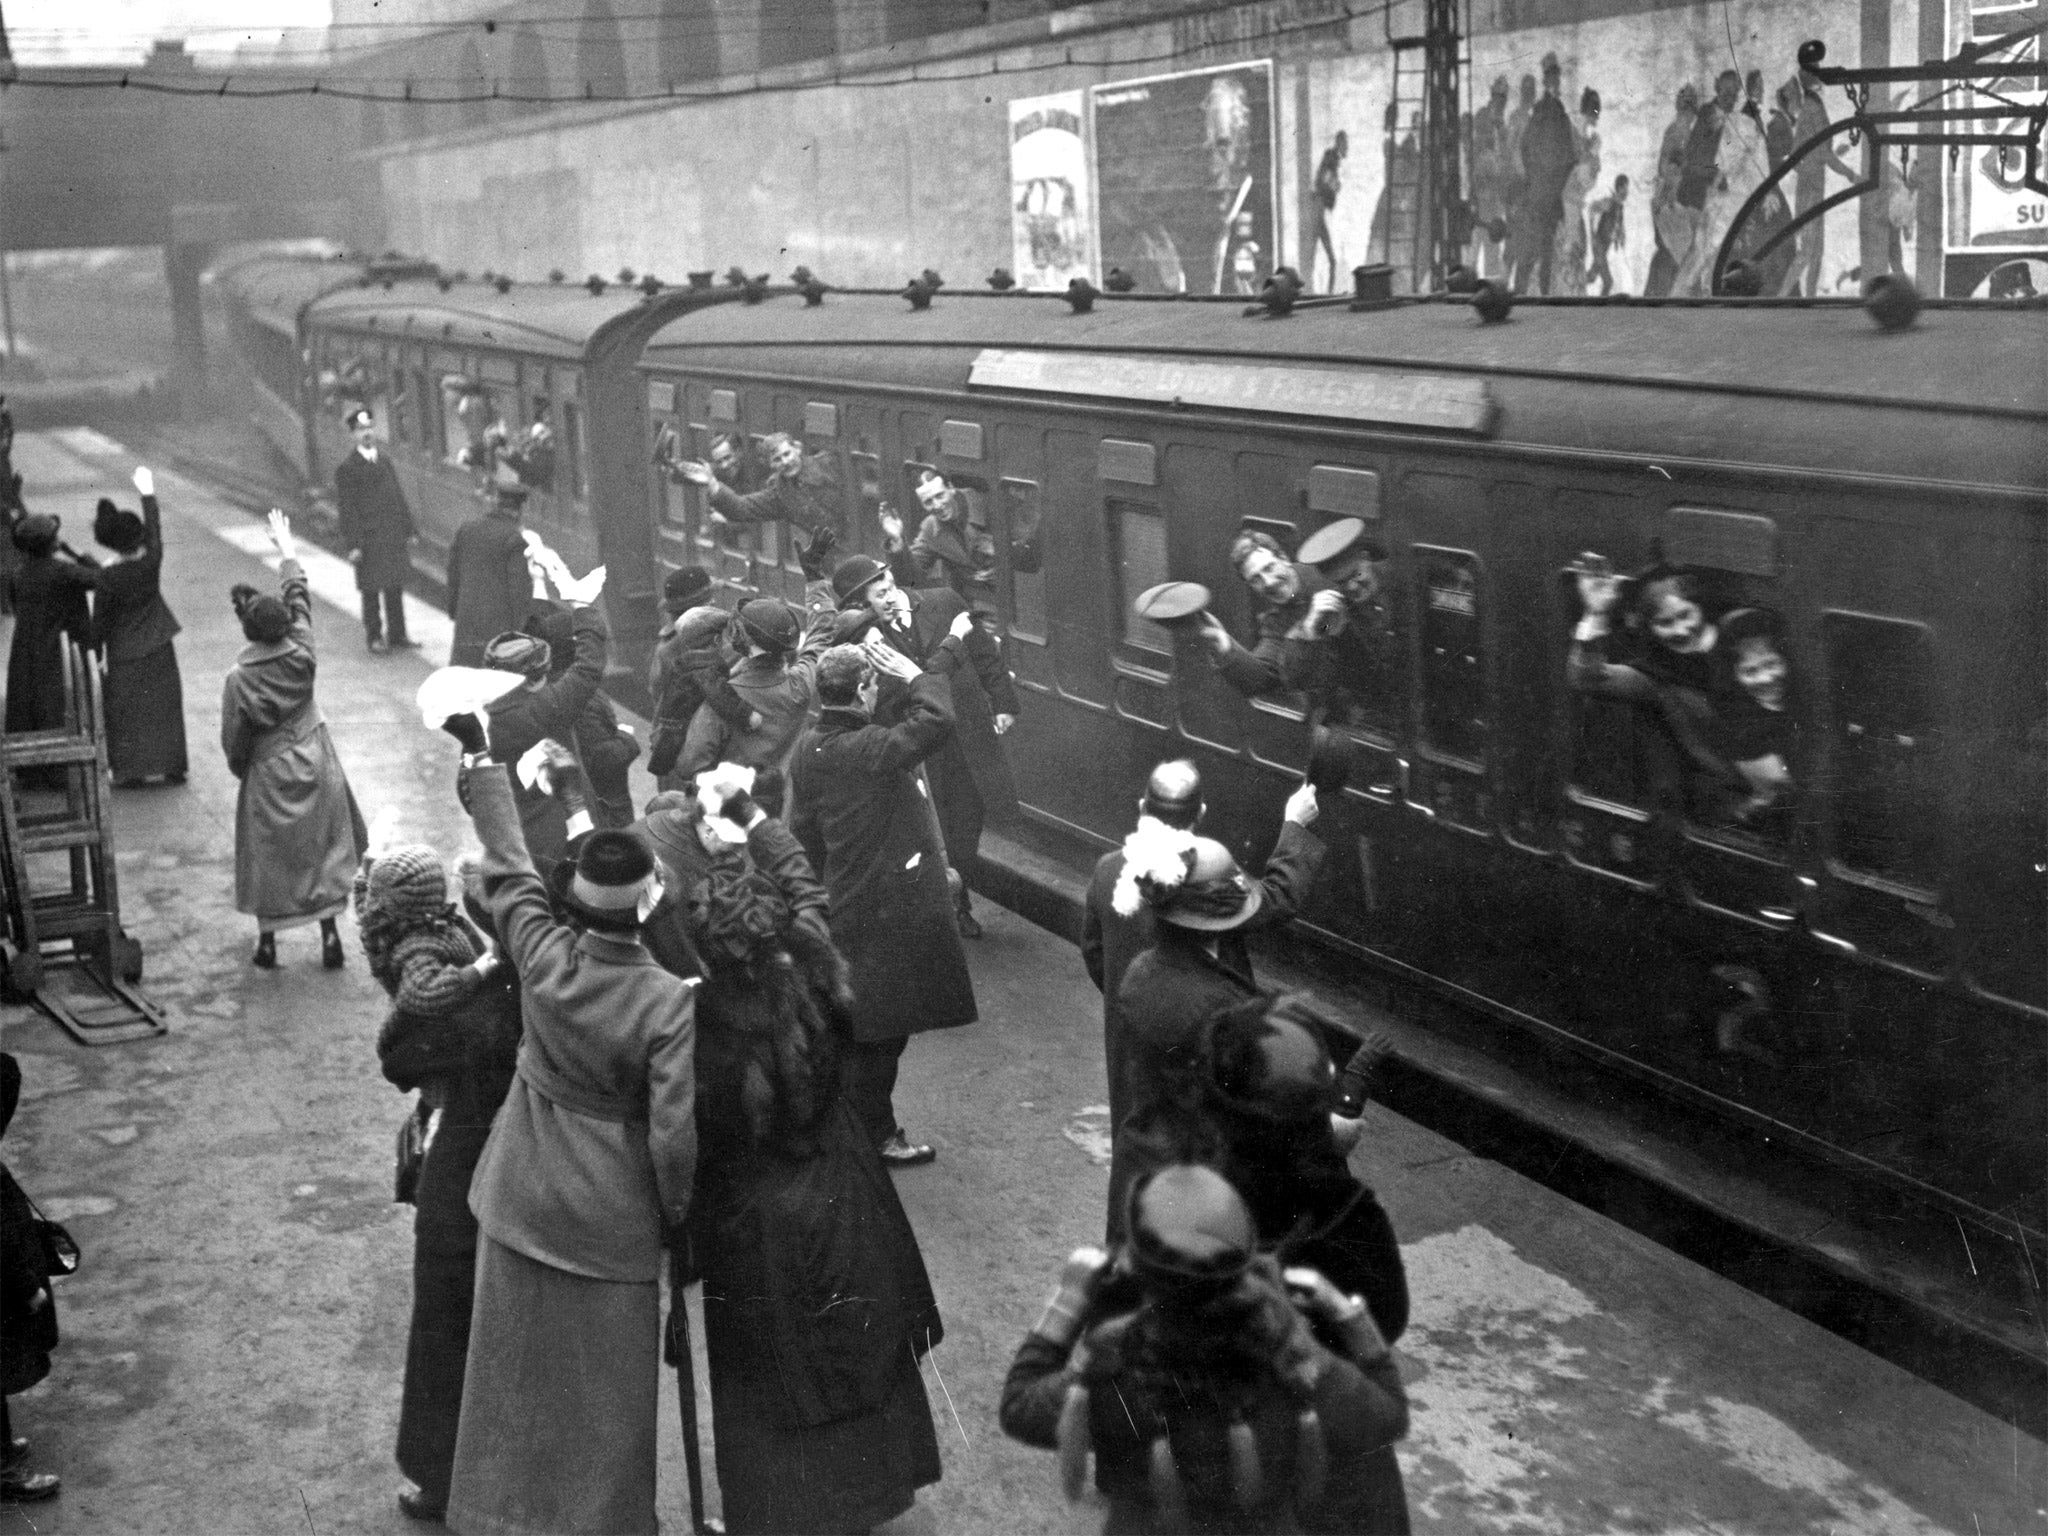 Soldiers waving good bye to loved ones as they leave Victoria Station in 1915